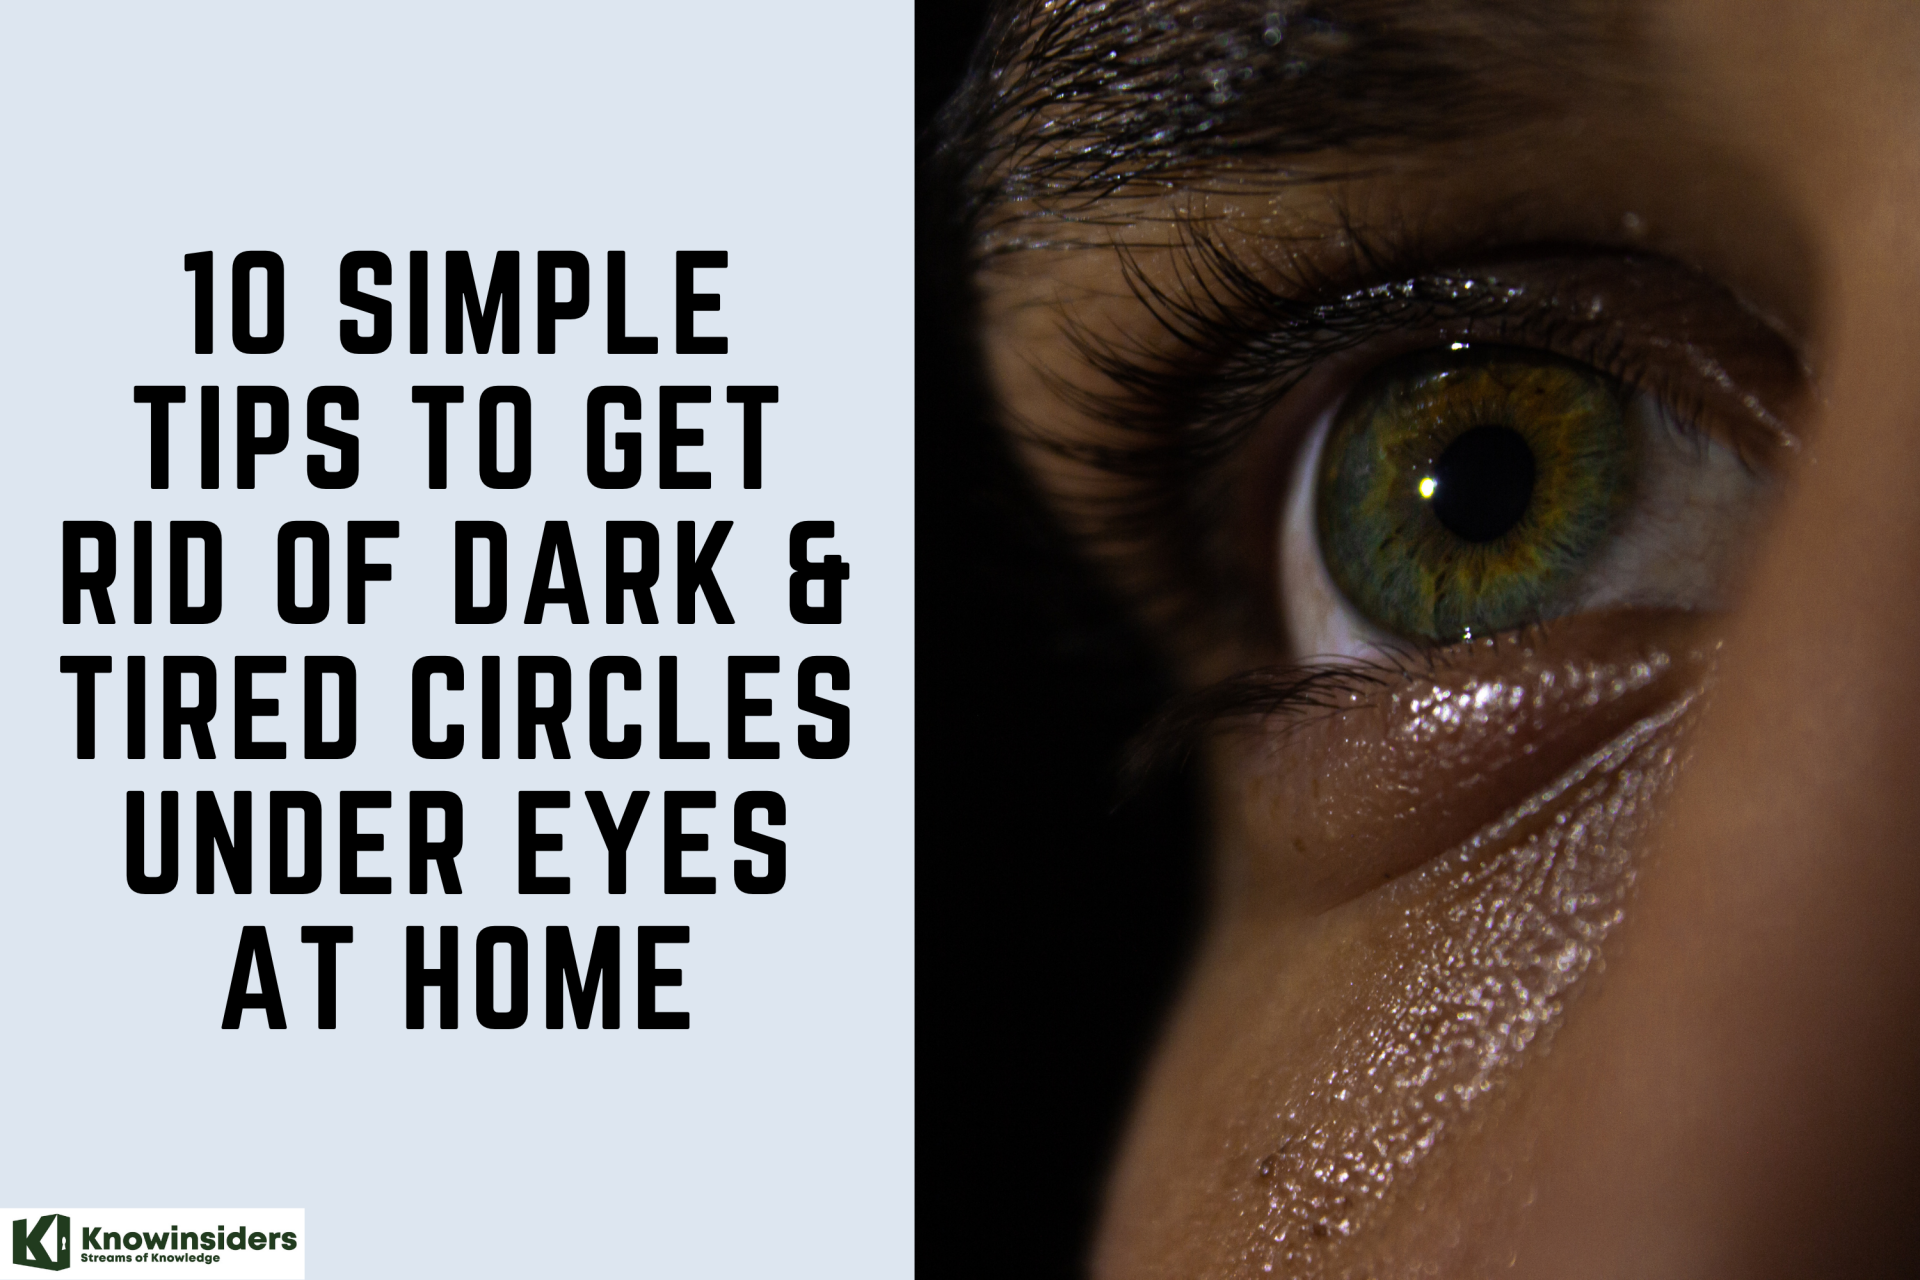 How to Get Rid of Dark & Tired Circles Under Eyes At Home with 10 Simple Tips